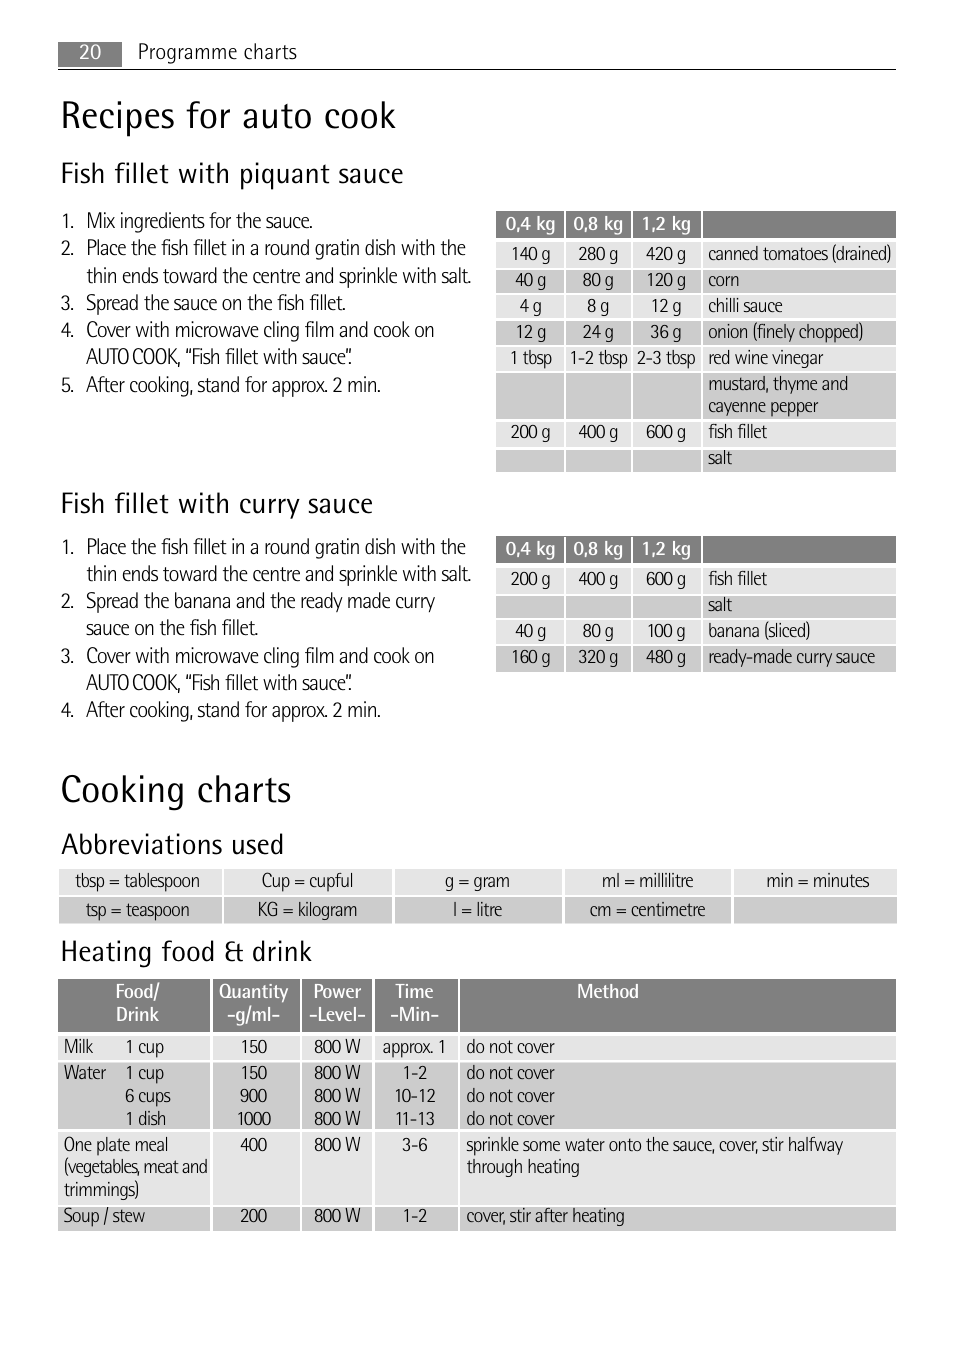 Recipes for auto cook, Cooking charts, Fish fillet with piquant sauce | Fish fillet with curry sauce, Heating food & drink, Abbreviations used | AEG MC2664E-W User Manual | Page 20 / 36